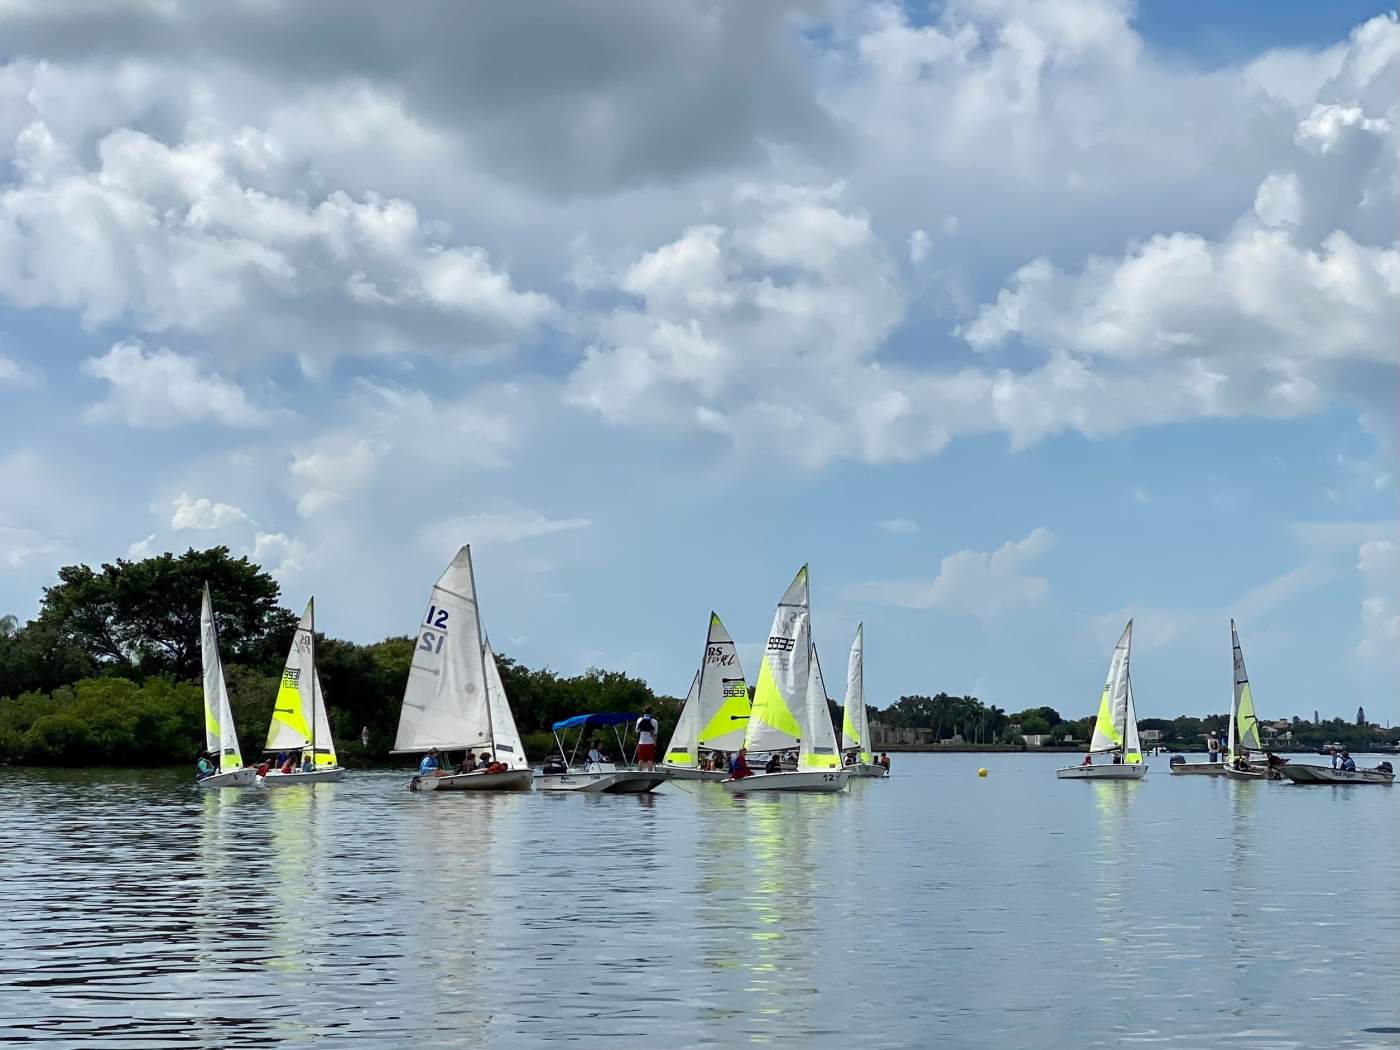 A group of sailboats sailing in the lagoon